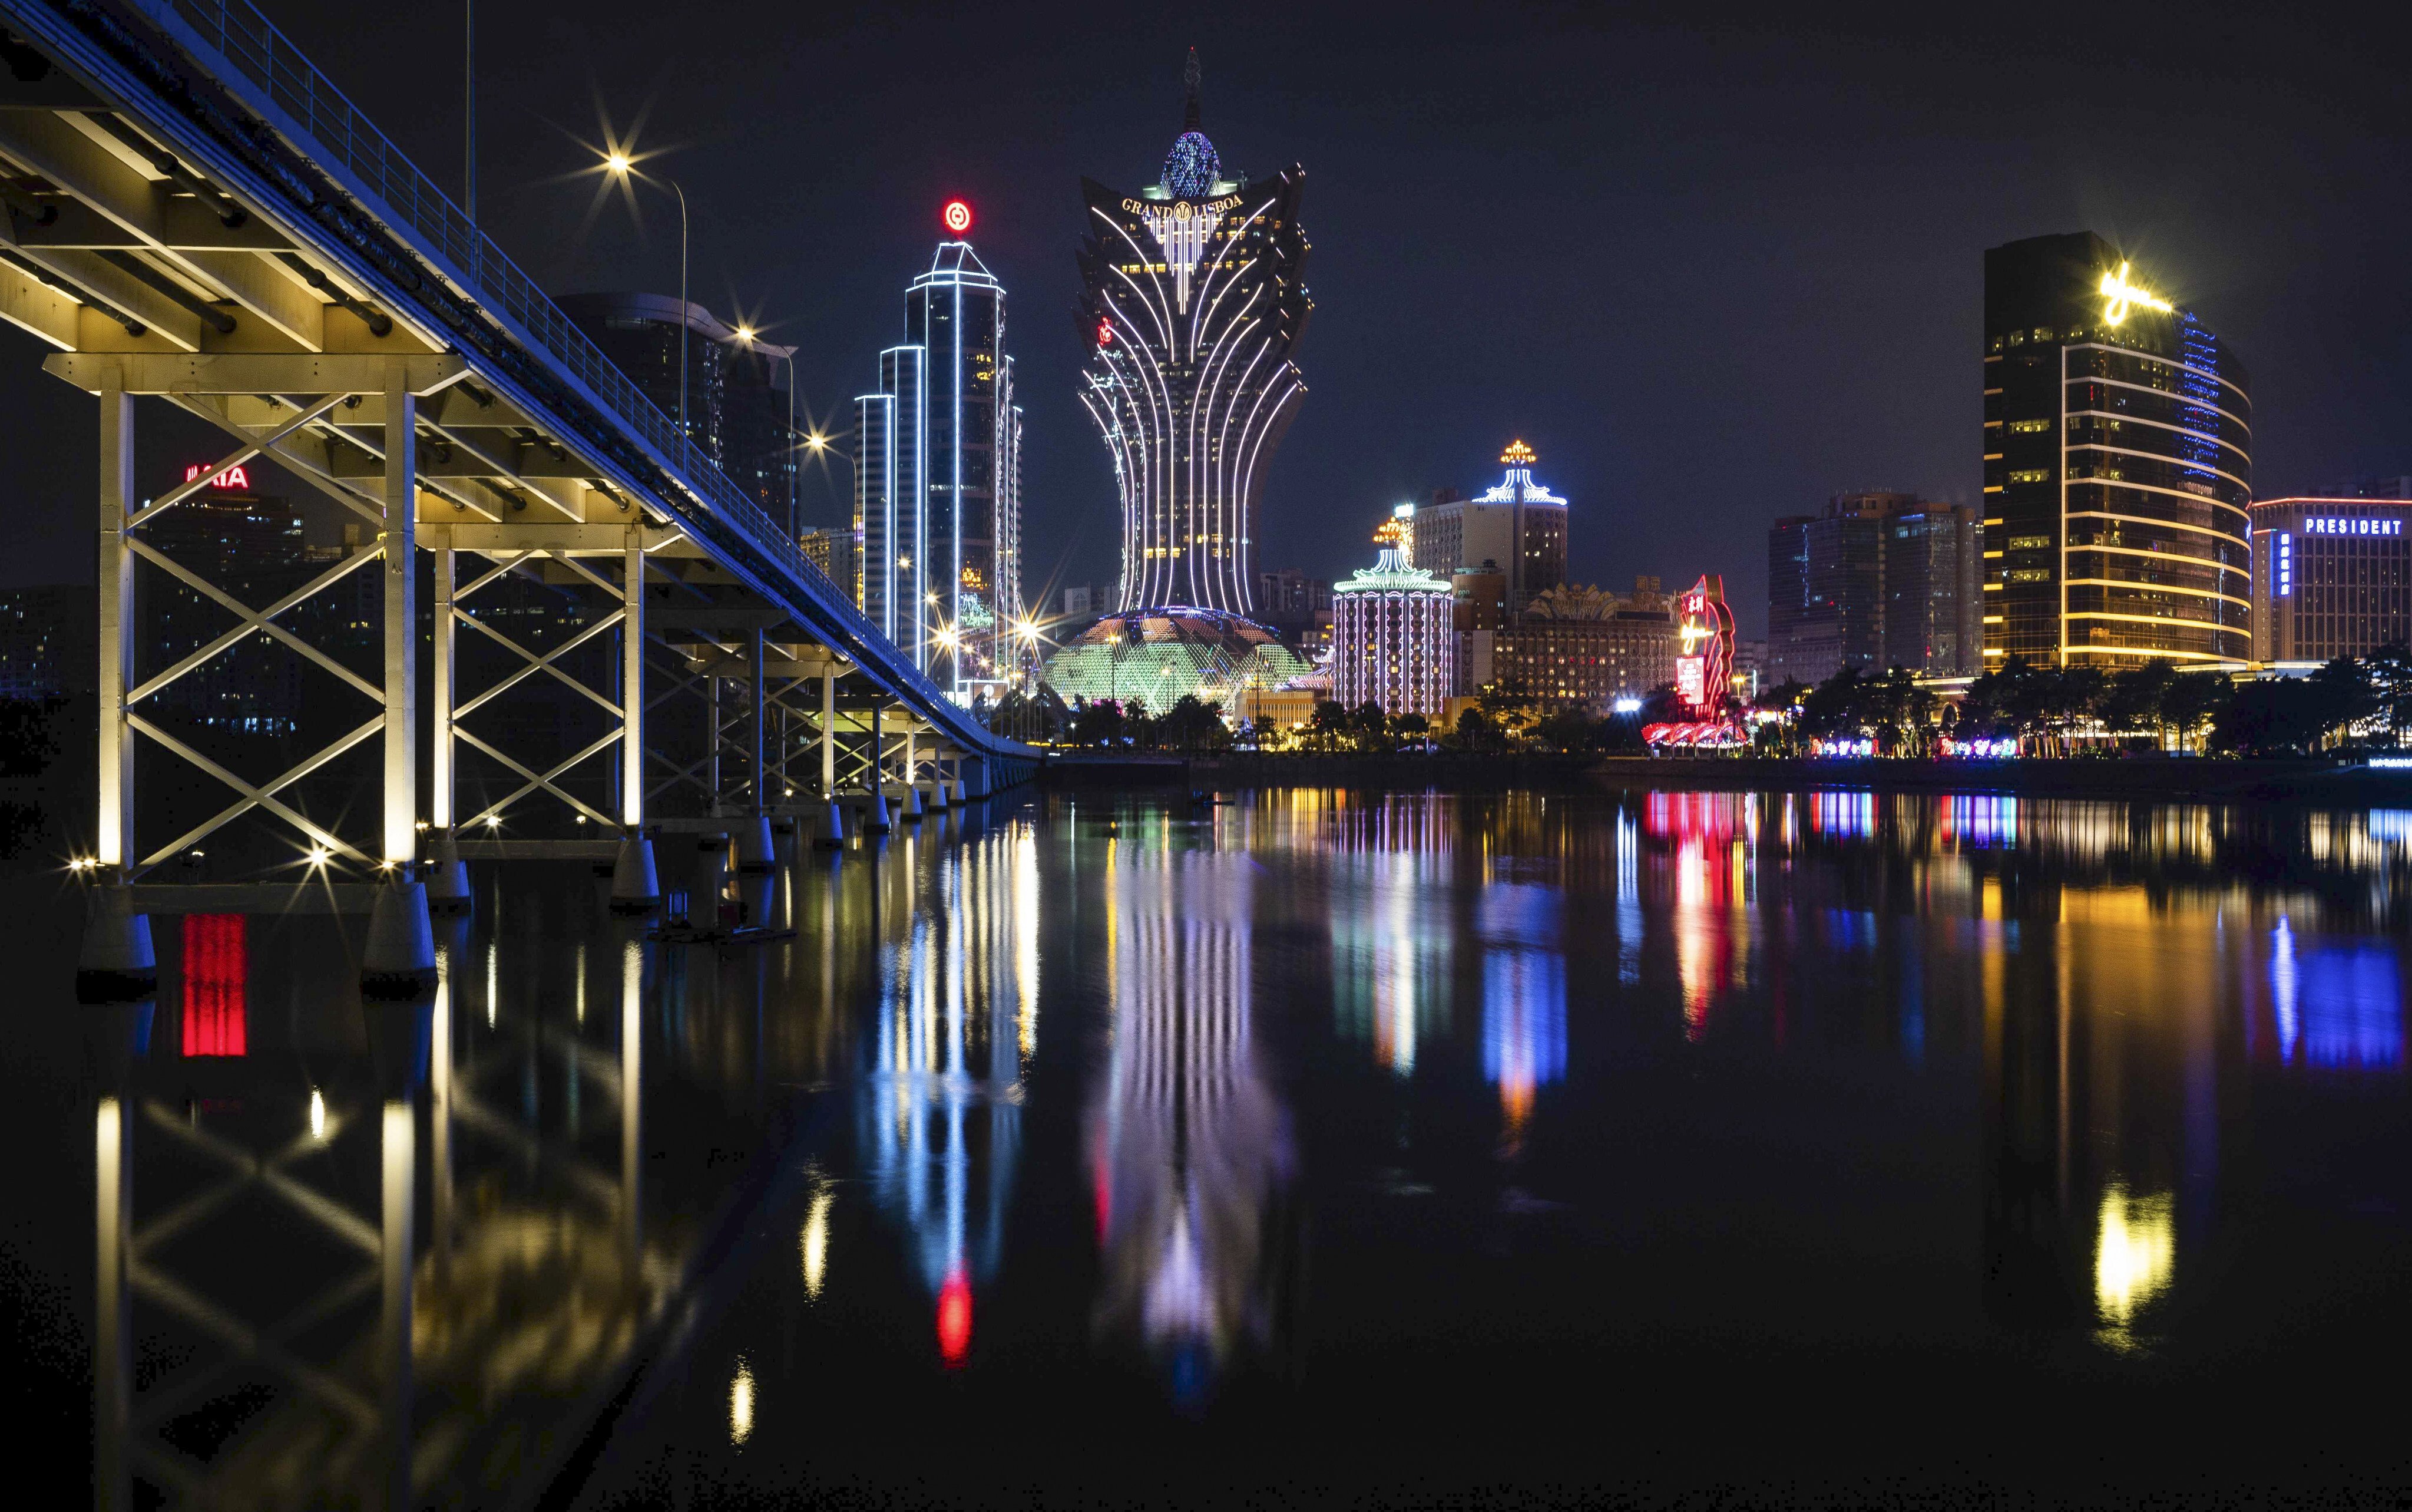 The gaming industry in Macau has contributed greatly to its economy, but the sector has been shrinking amid a crackdown. Photo: AFP